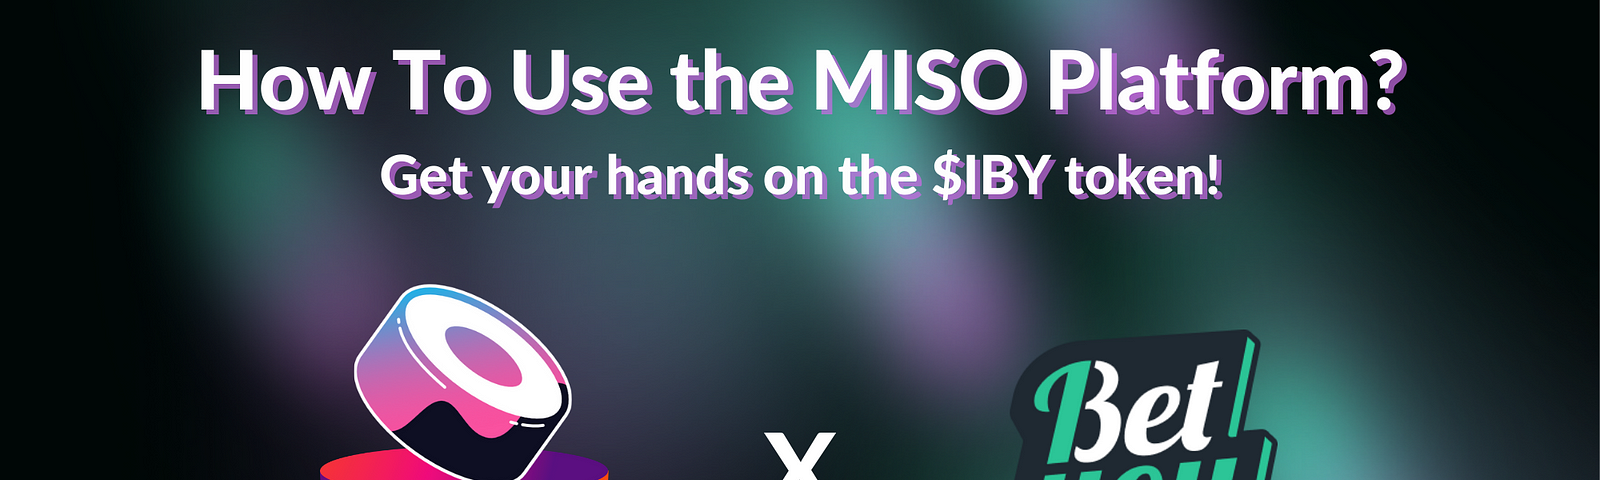 How to use the MISO platform?